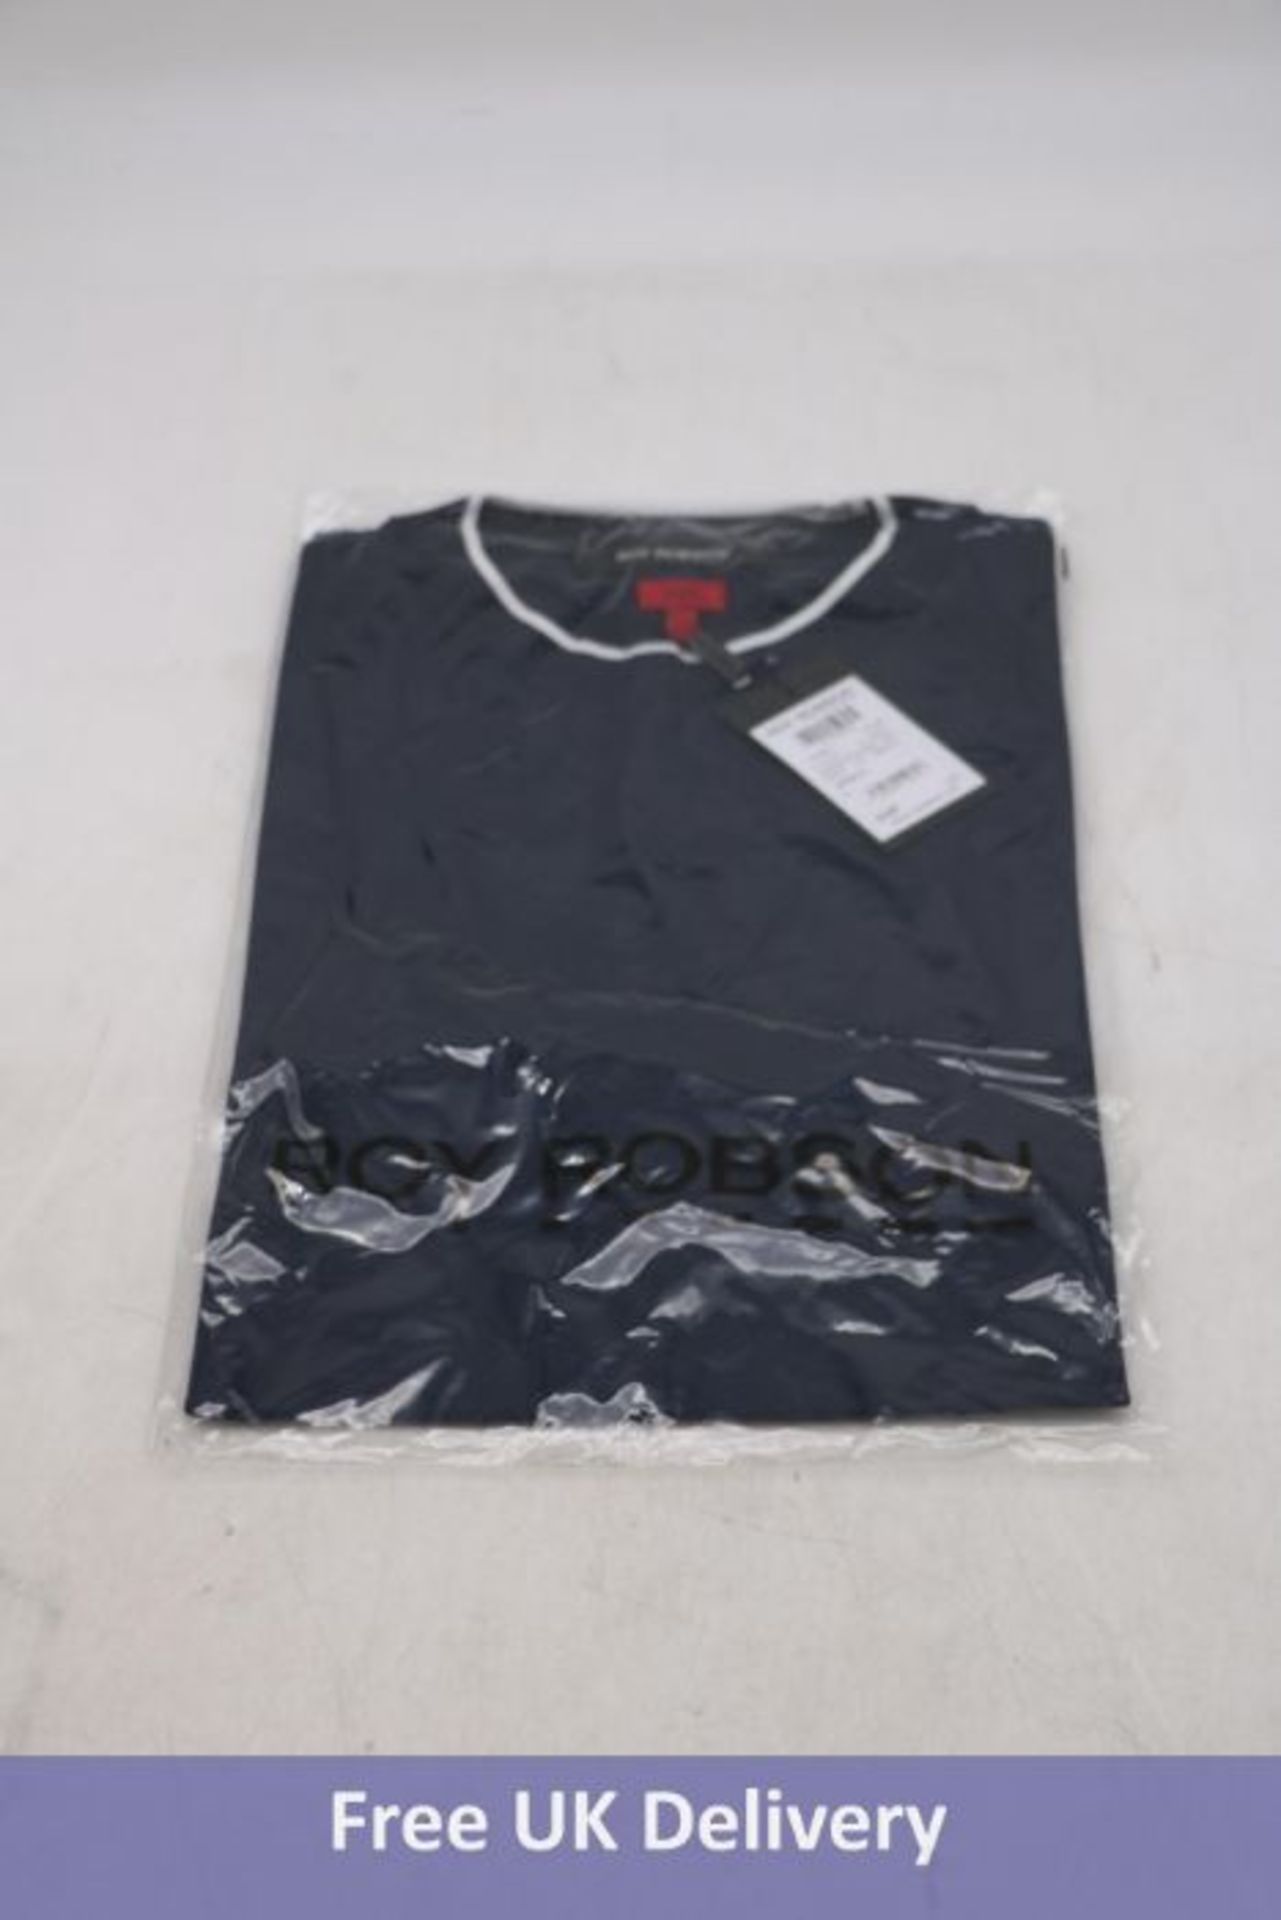 Four Roy Robson Men's Slim Fit T-Shirts, Navy to include 1x Medium, 1x Large and 2x XL